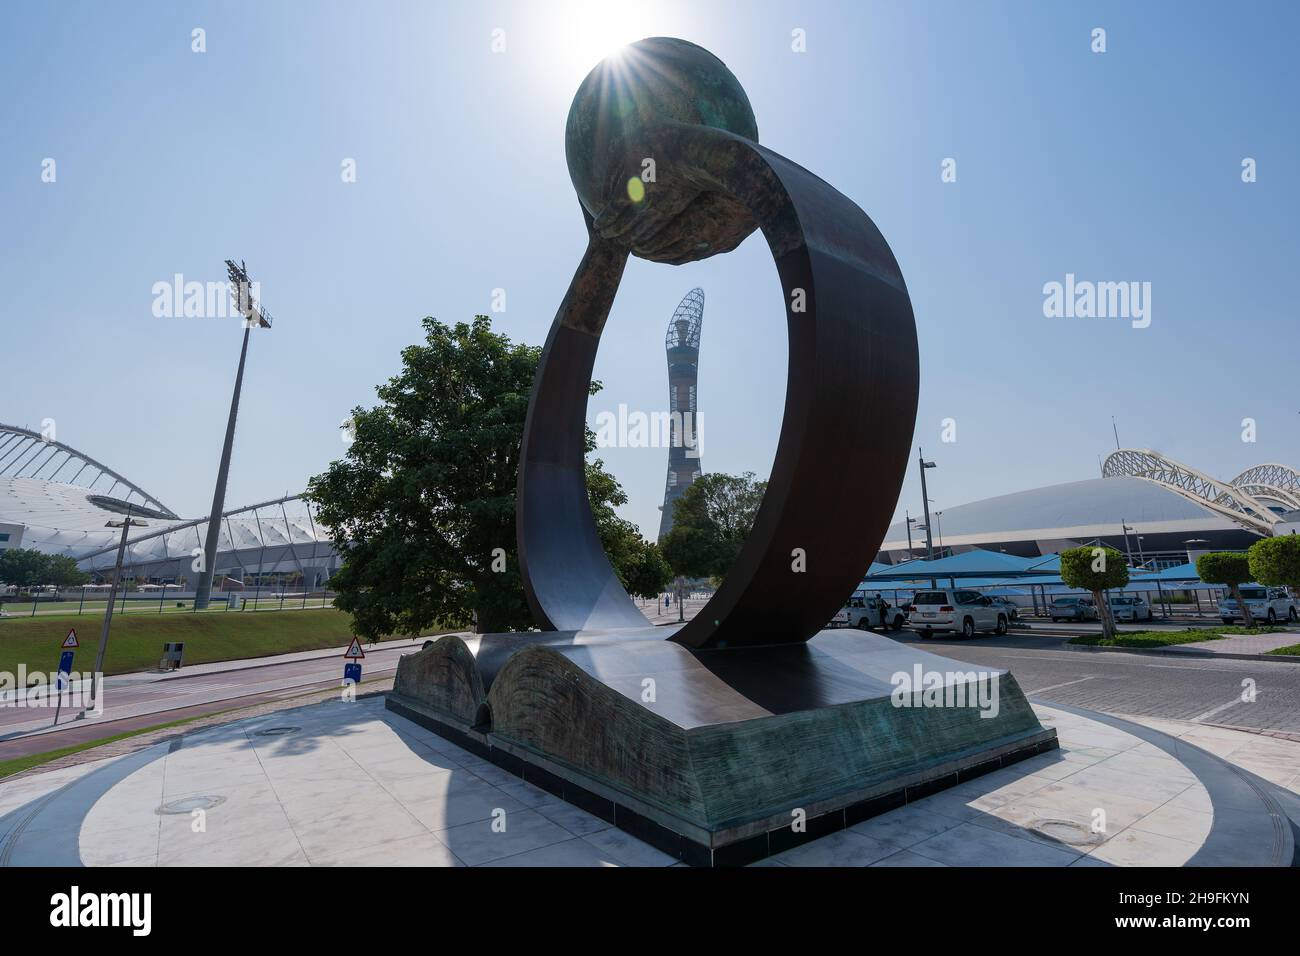 QATAR - NOV 13, 2021:A sculpture of hands rising from a book support the globe sculpture in Aspire Doha.The 2022 buildings is framed between the arms. Stock Photo